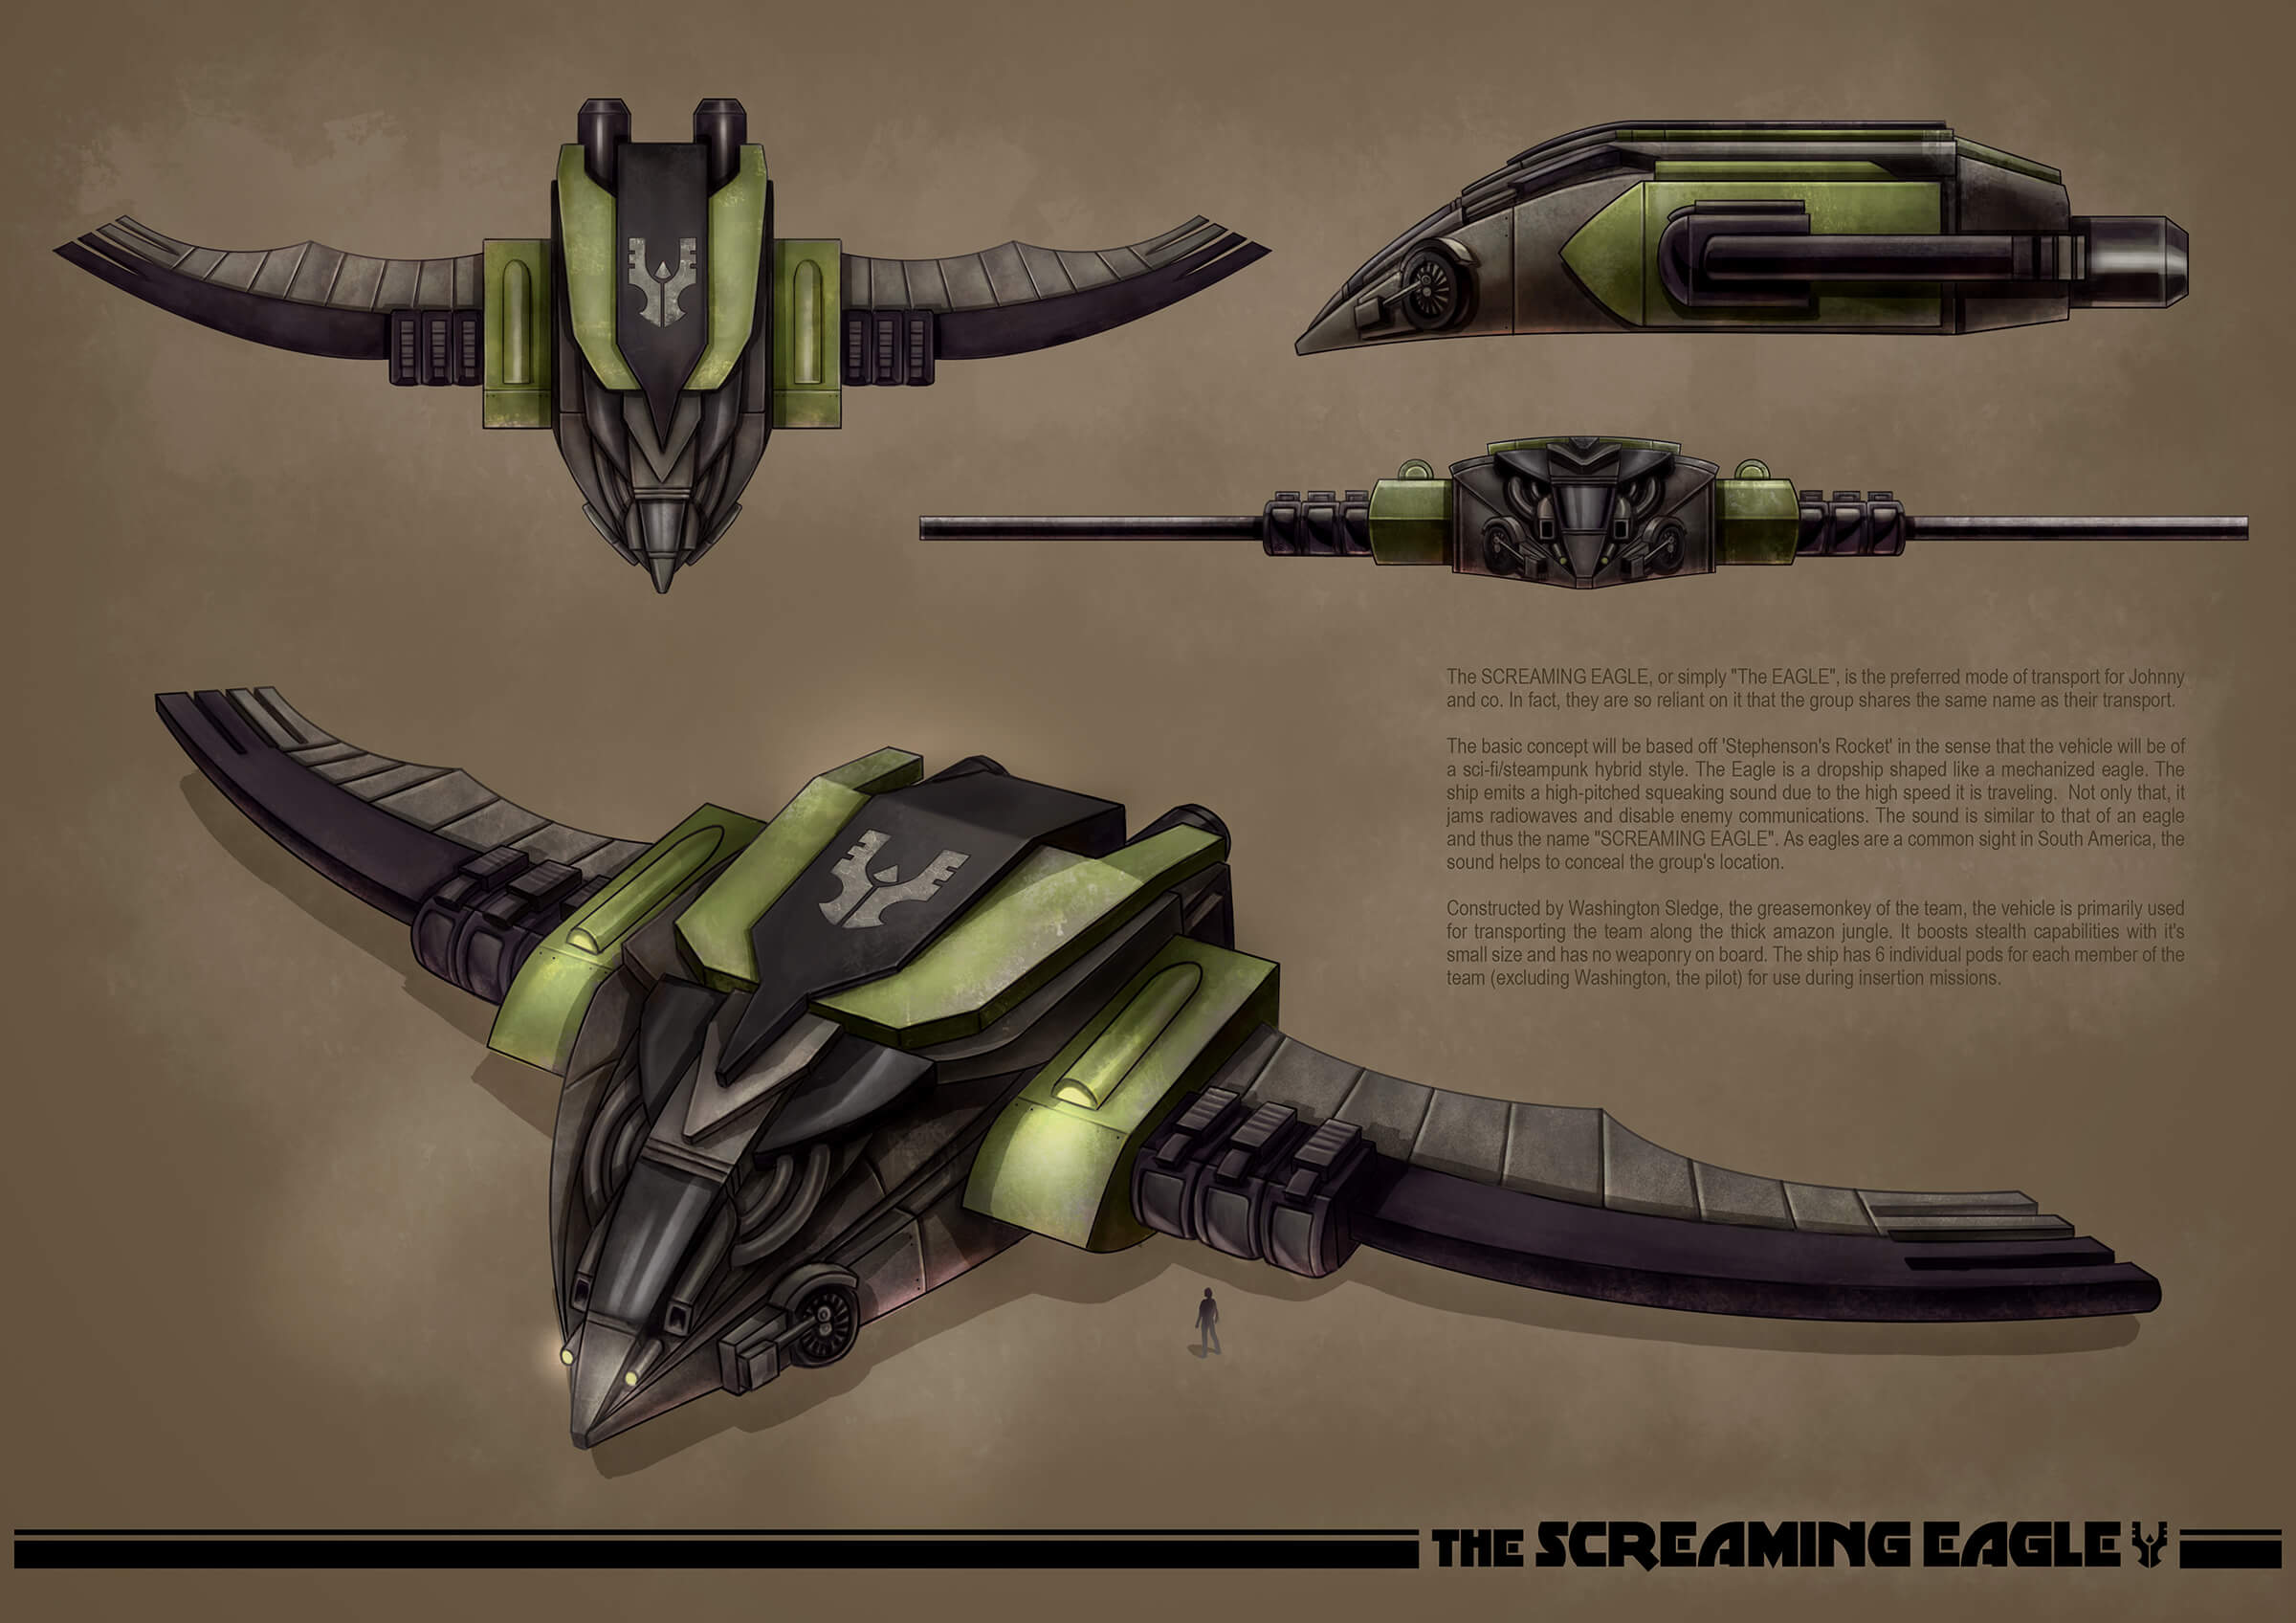 Concept art of a black and green flying vehicle with ornamentation resembling an eagle as seen from different angles.